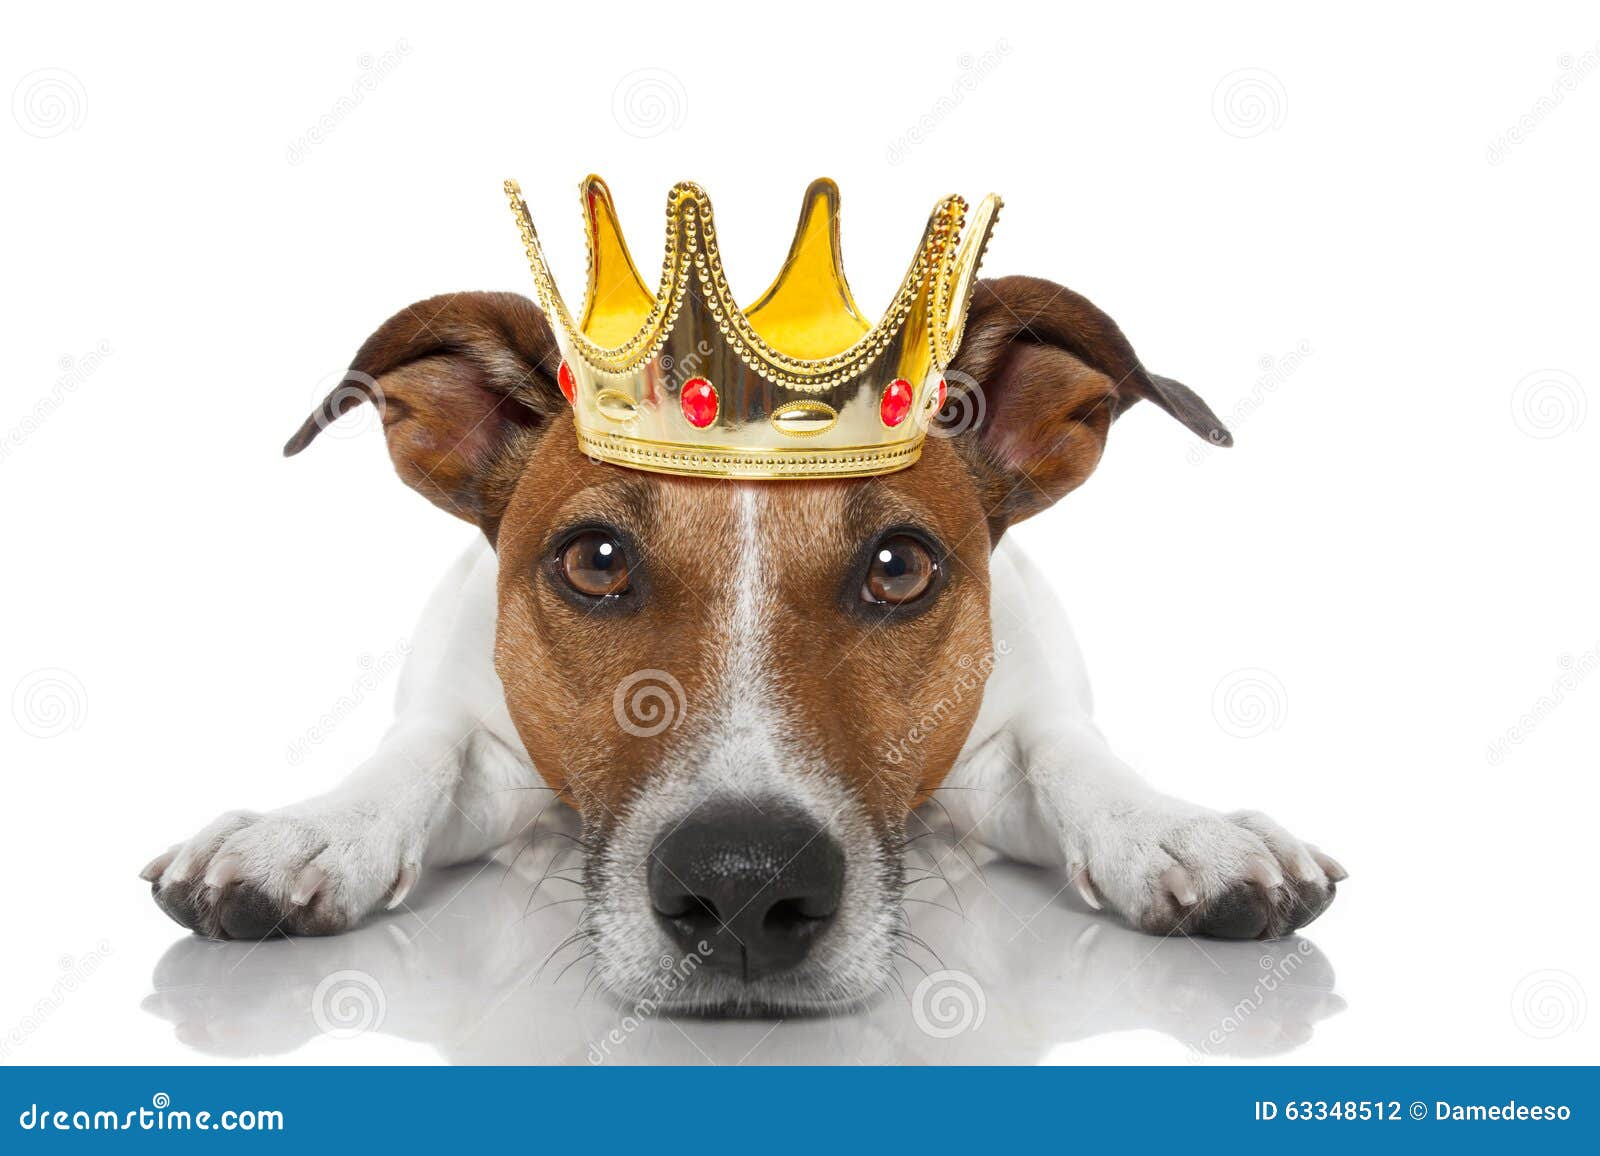 crown king dog jack russell as looking staring you lying ground floor isolated white background 63348512